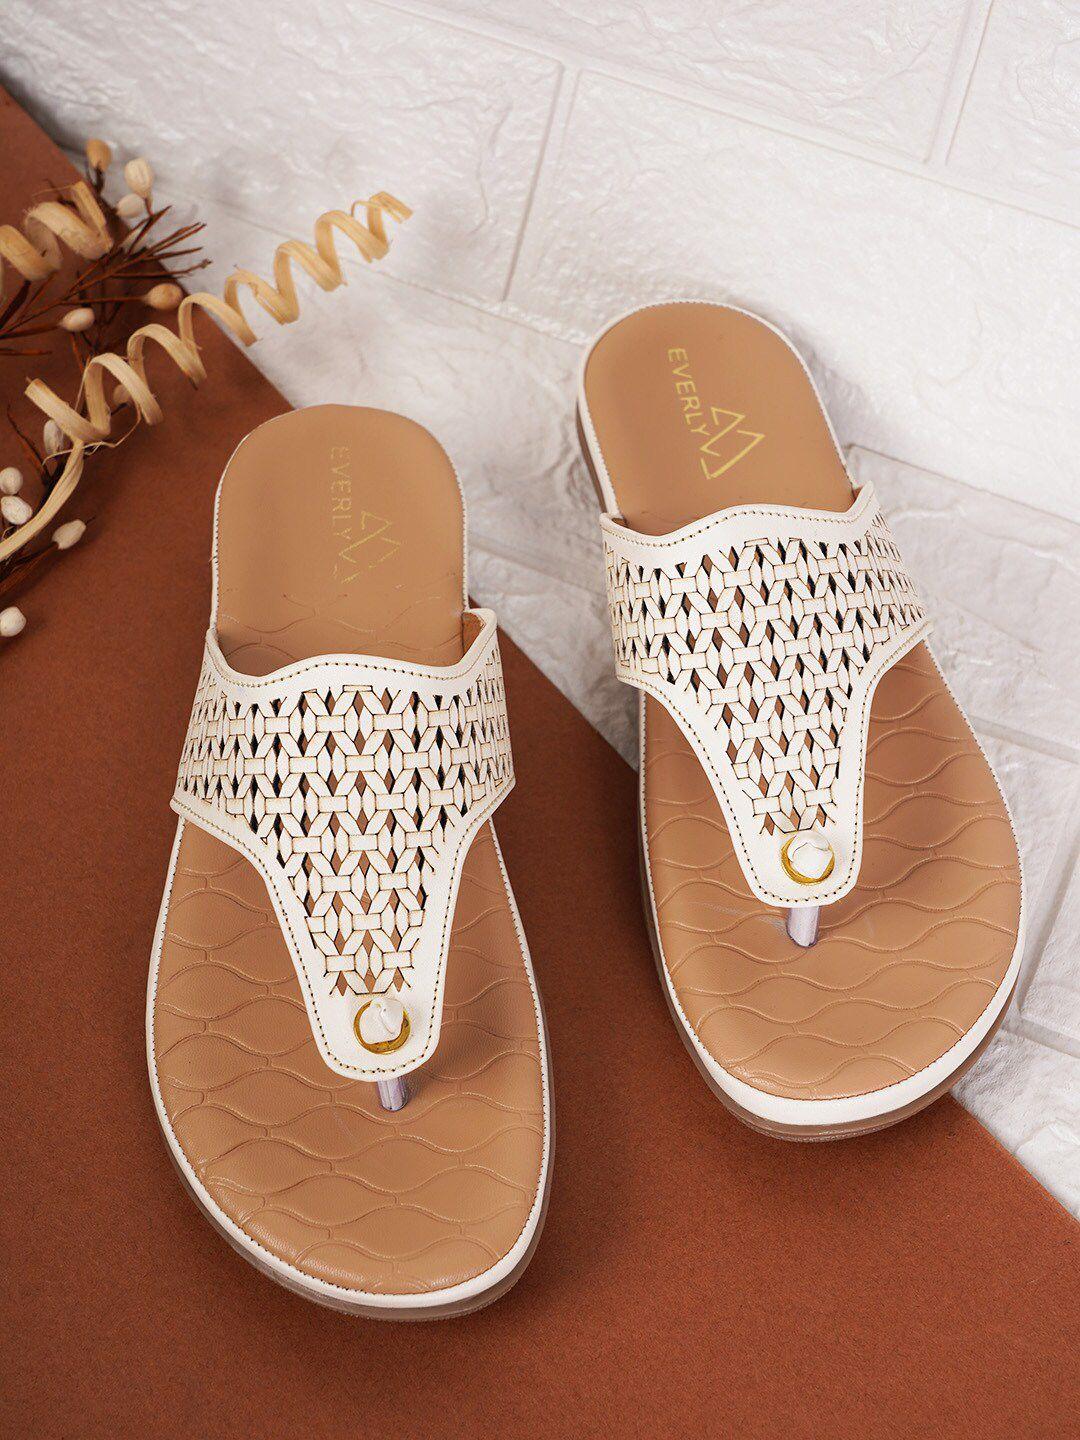 everly-laser-cuts-ortho-t-strap-flats